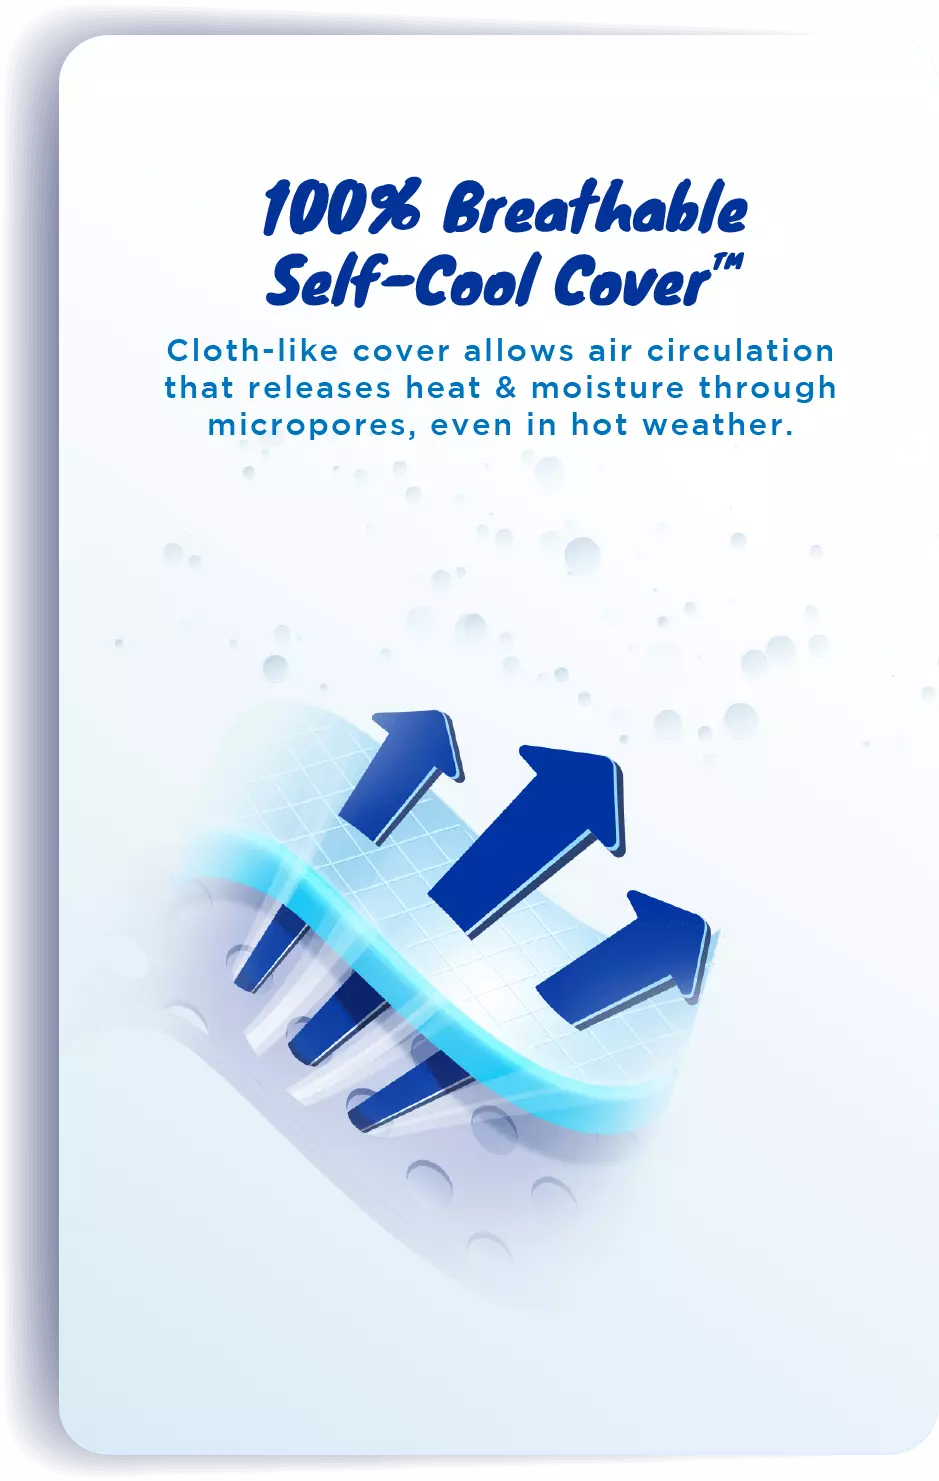 100% Breathable Self-cool Cover™: Cloth-like cover allows air circulation that releases heat & moisture through micropores, even in hot weather.